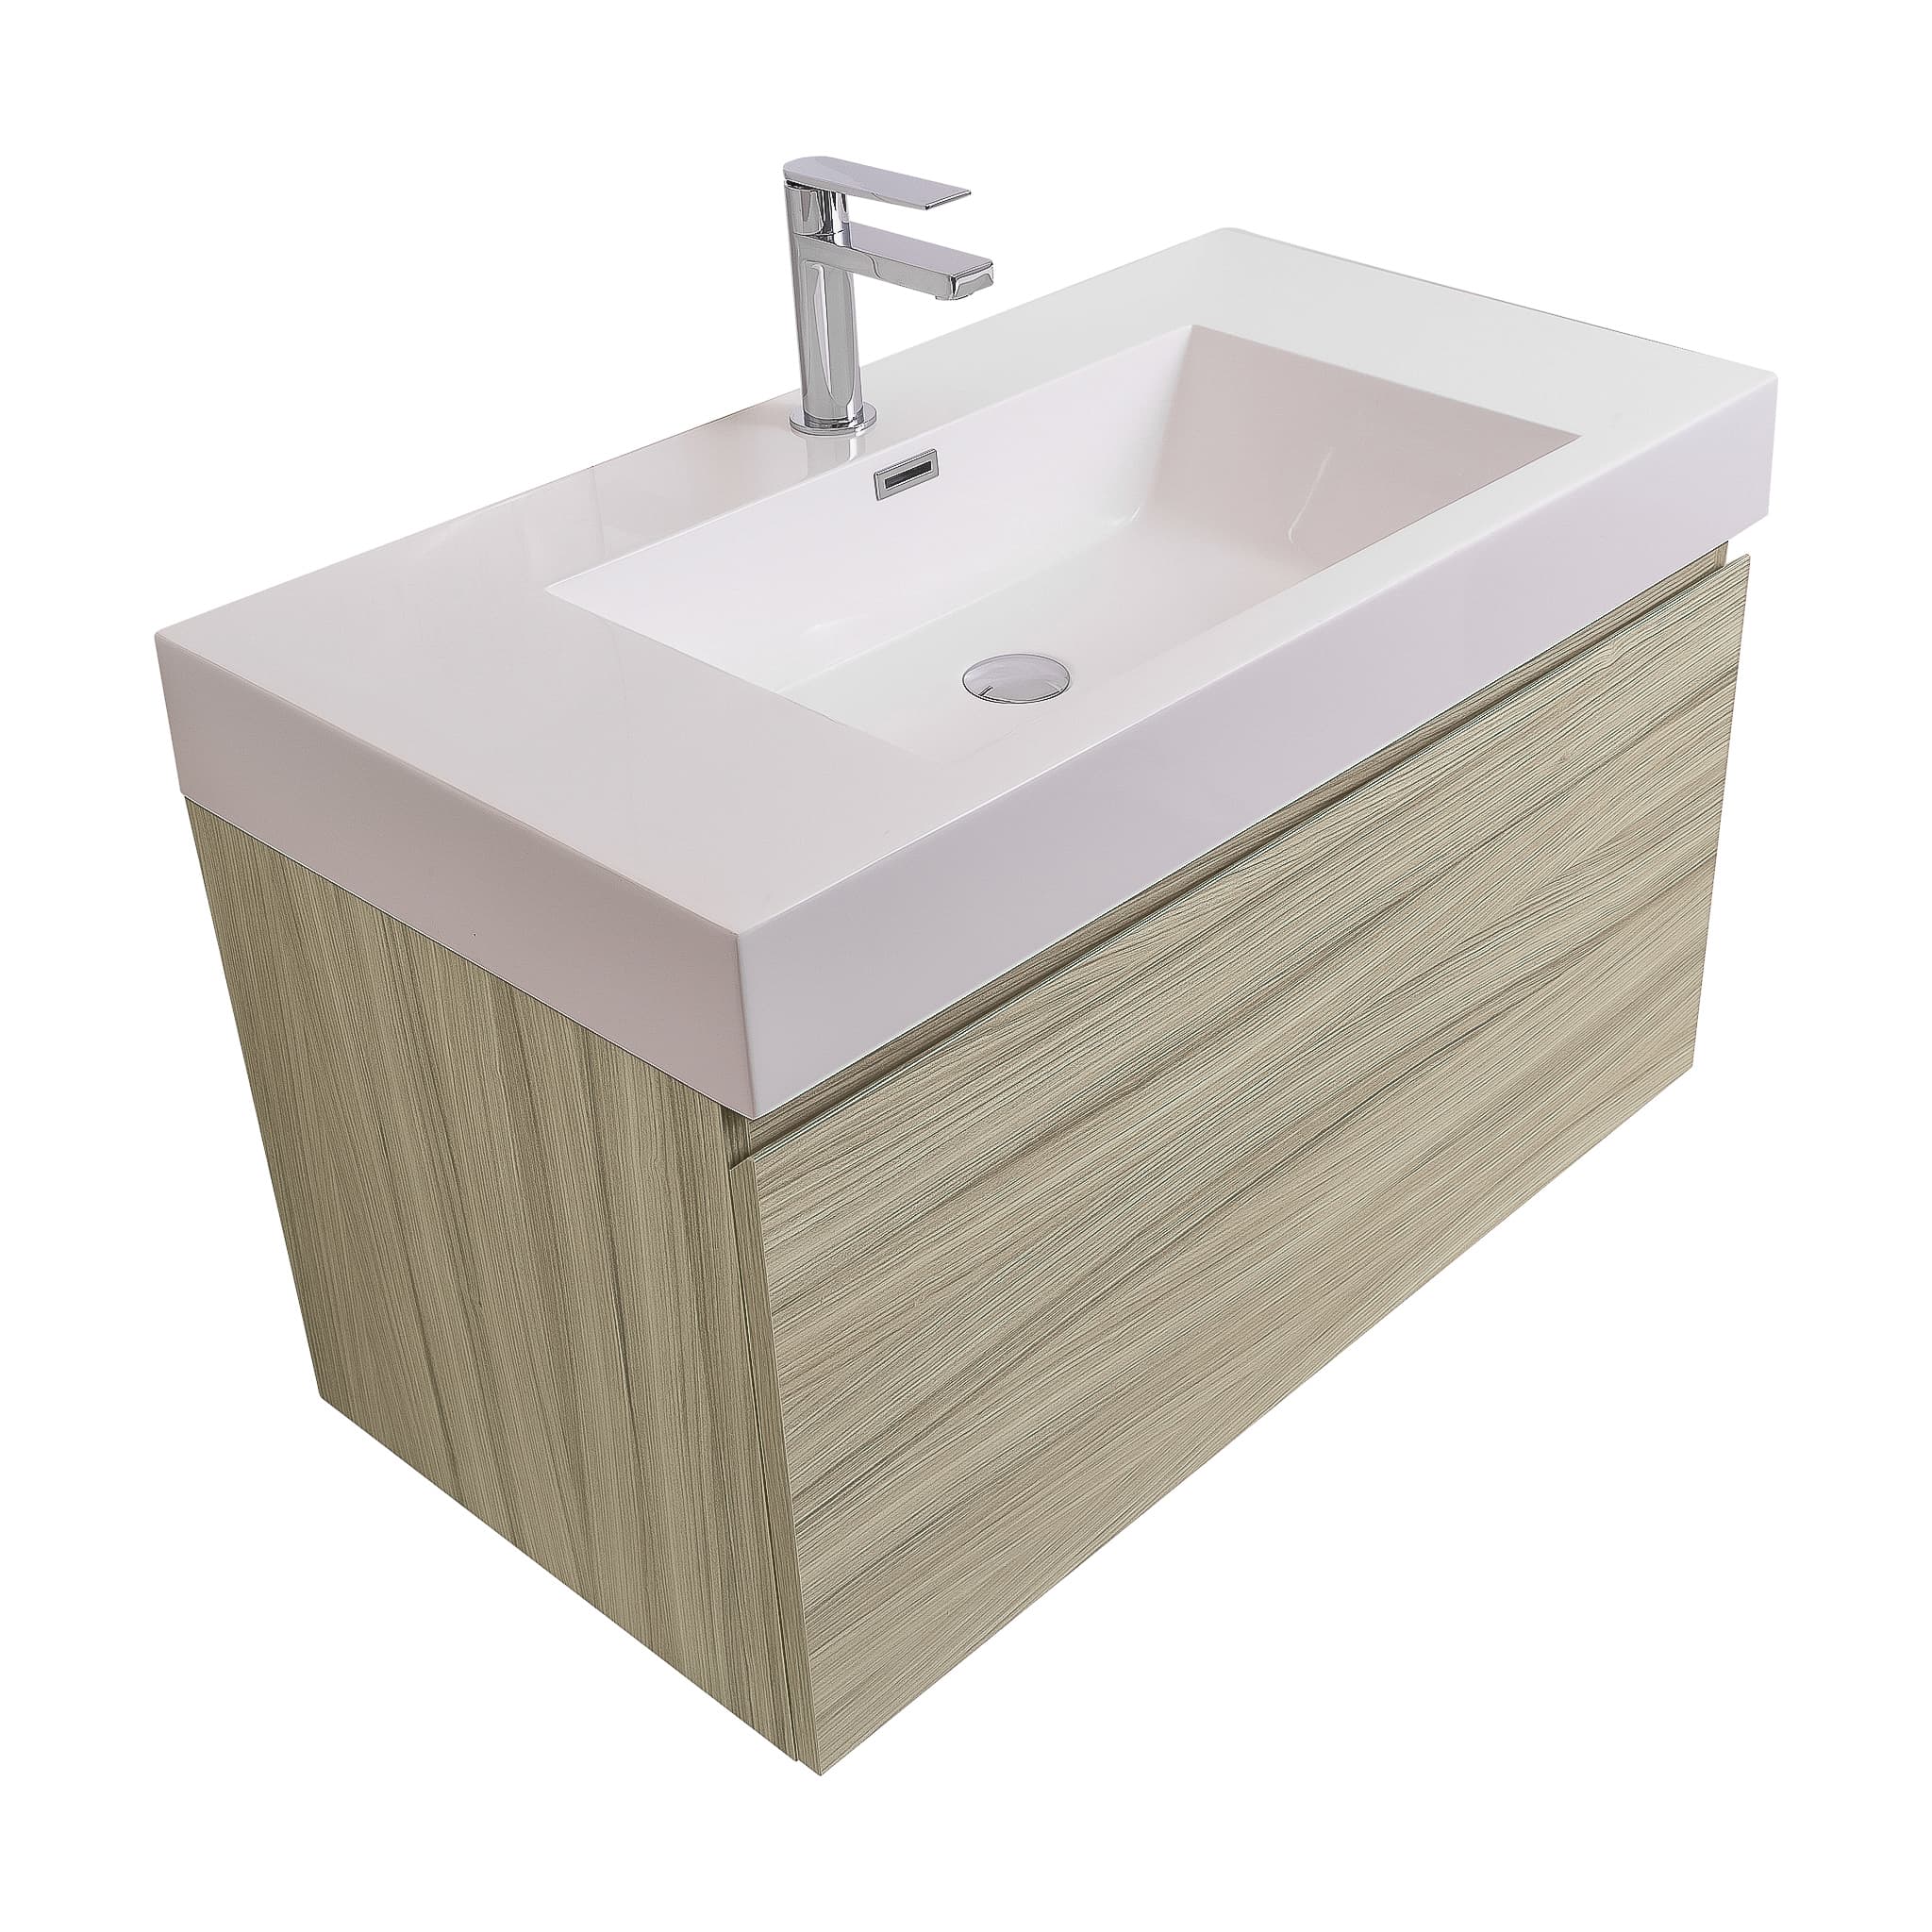 Venice 31.5 Nilo Grey Wood Texture Cabinet, Square Cultured Marble Sink, Wall Mounted Modern Vanity Set